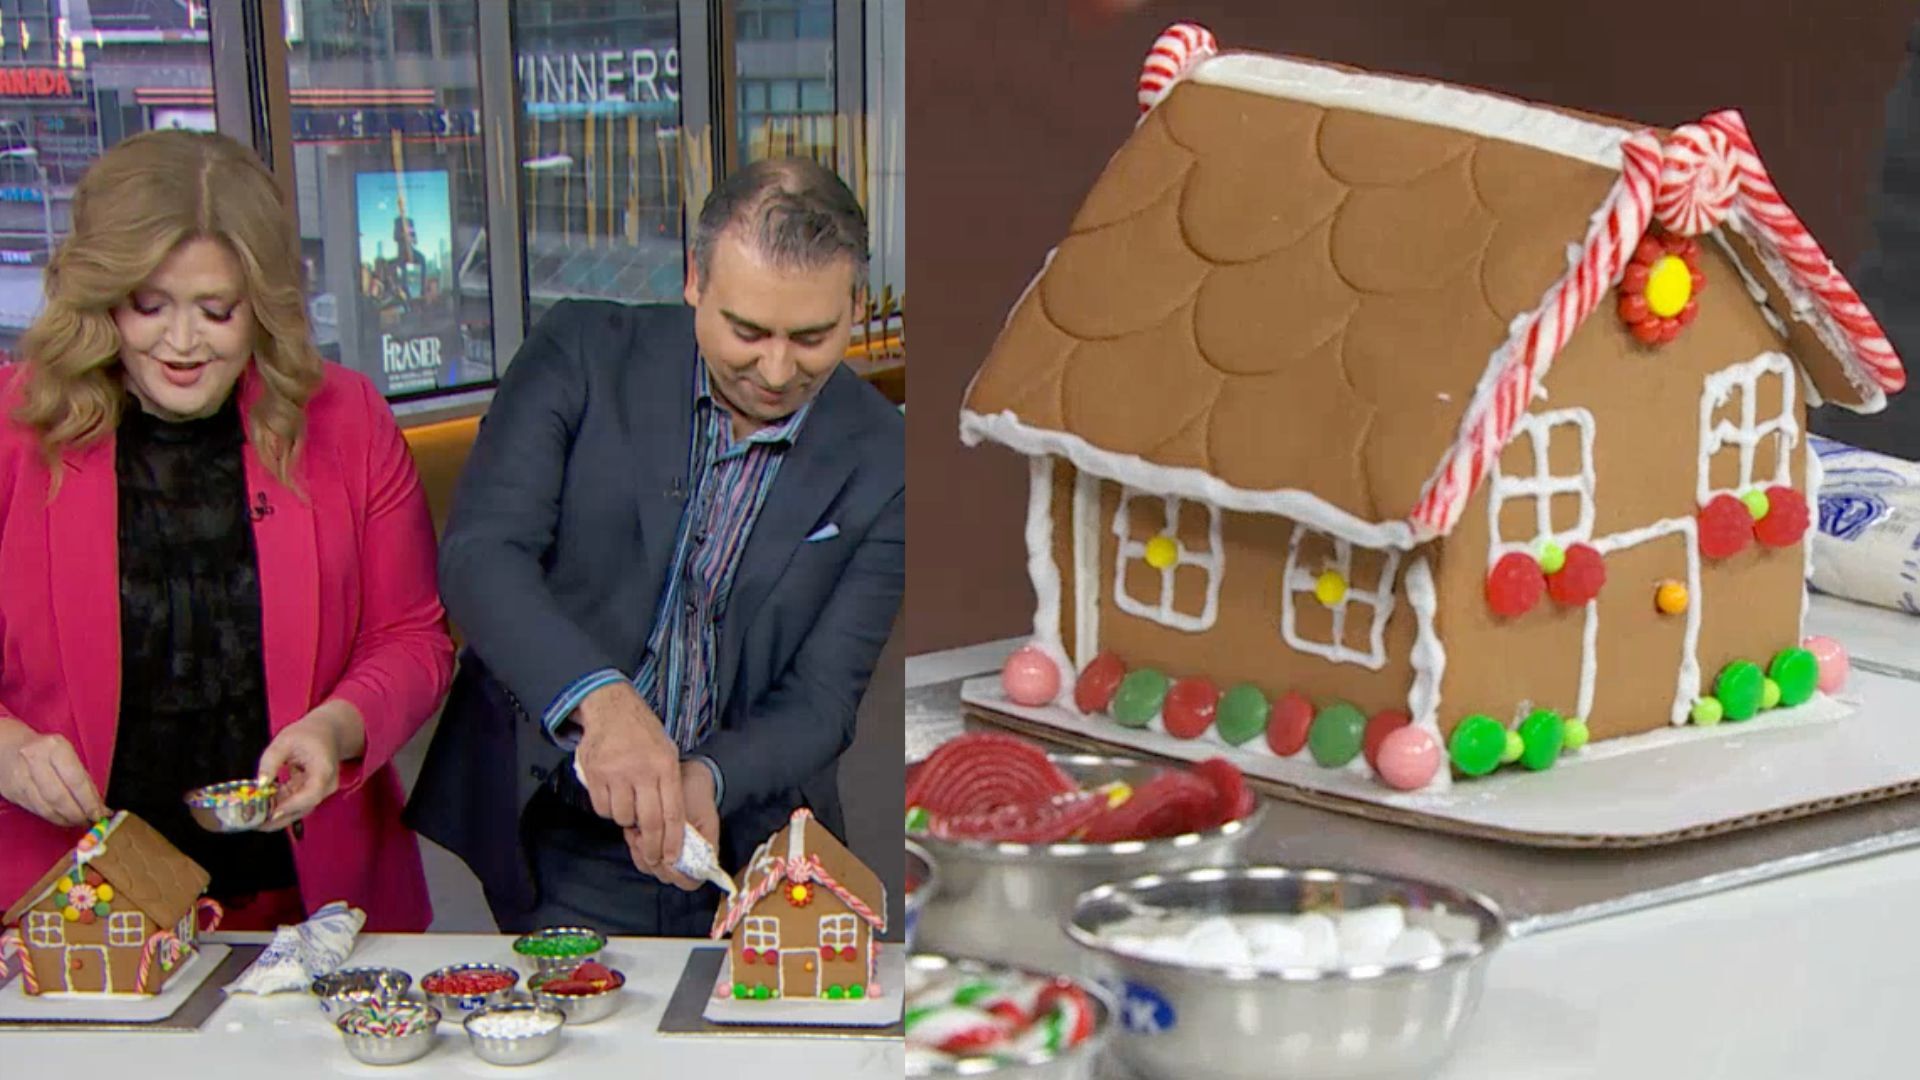 Put your gingerbread house skills to the test in support of paediatric brain tumour research